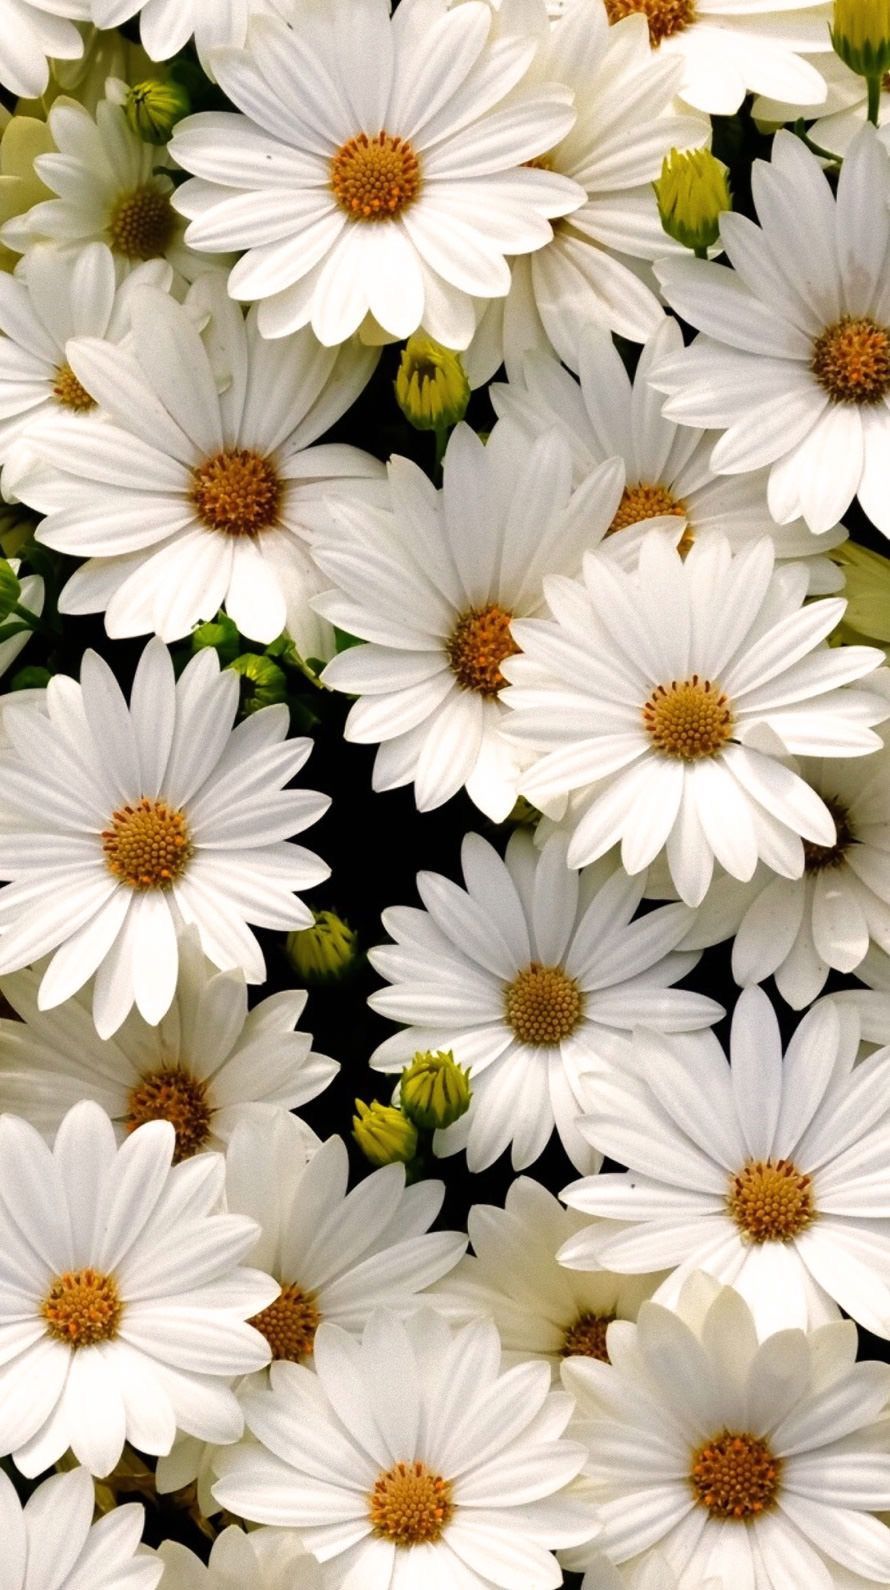 Daisies, Daisies, Perched Upon Your Forehead - Flores Margaritas , HD Wallpaper & Backgrounds